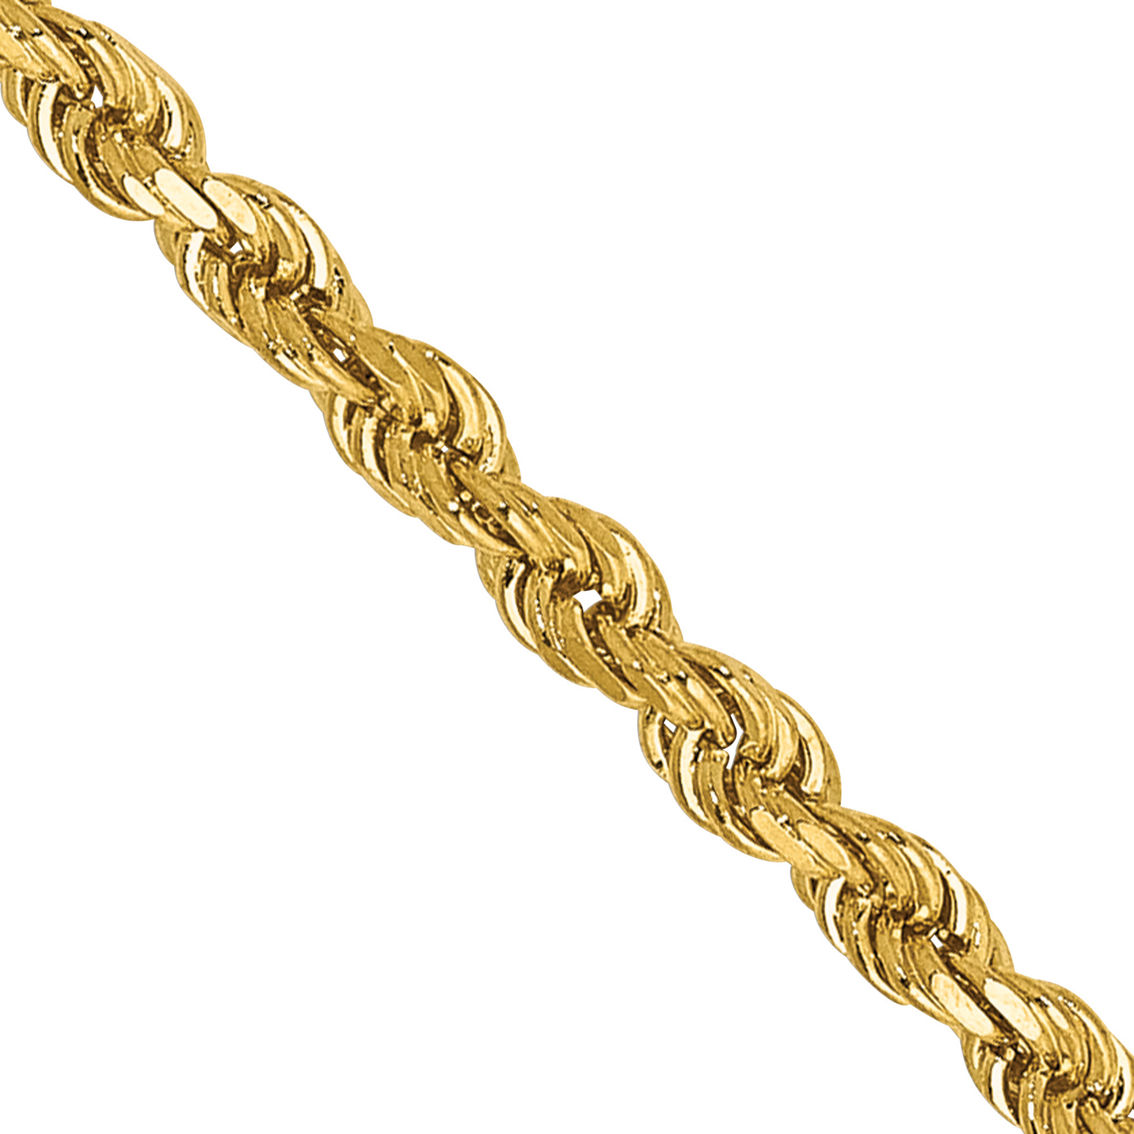 14K Gold 2mm Diamond Cut 18 in. Rope Chain - Image 2 of 5